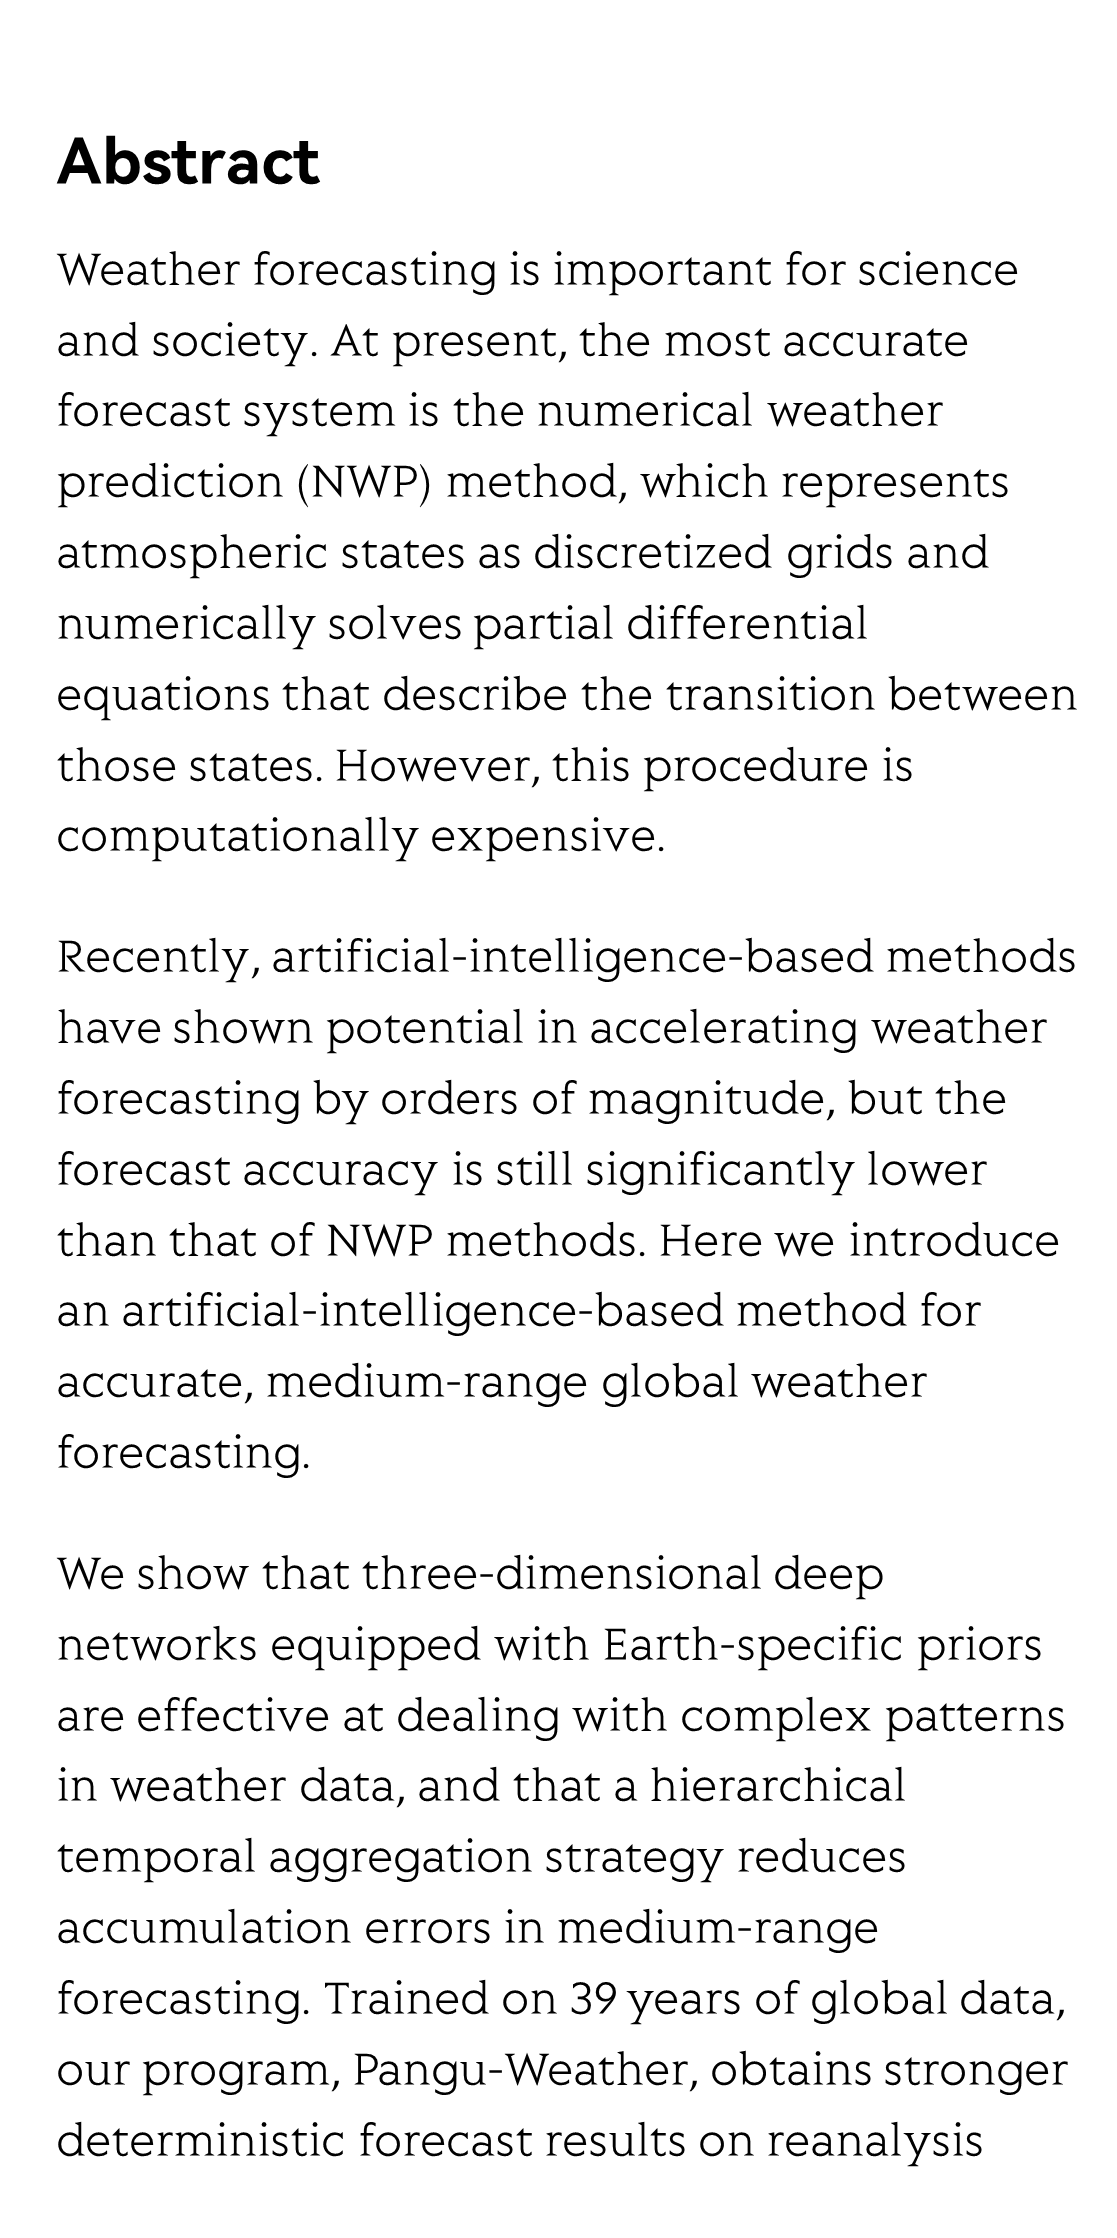 Accurate medium-range global weather forecasting with 3D neural networks_2